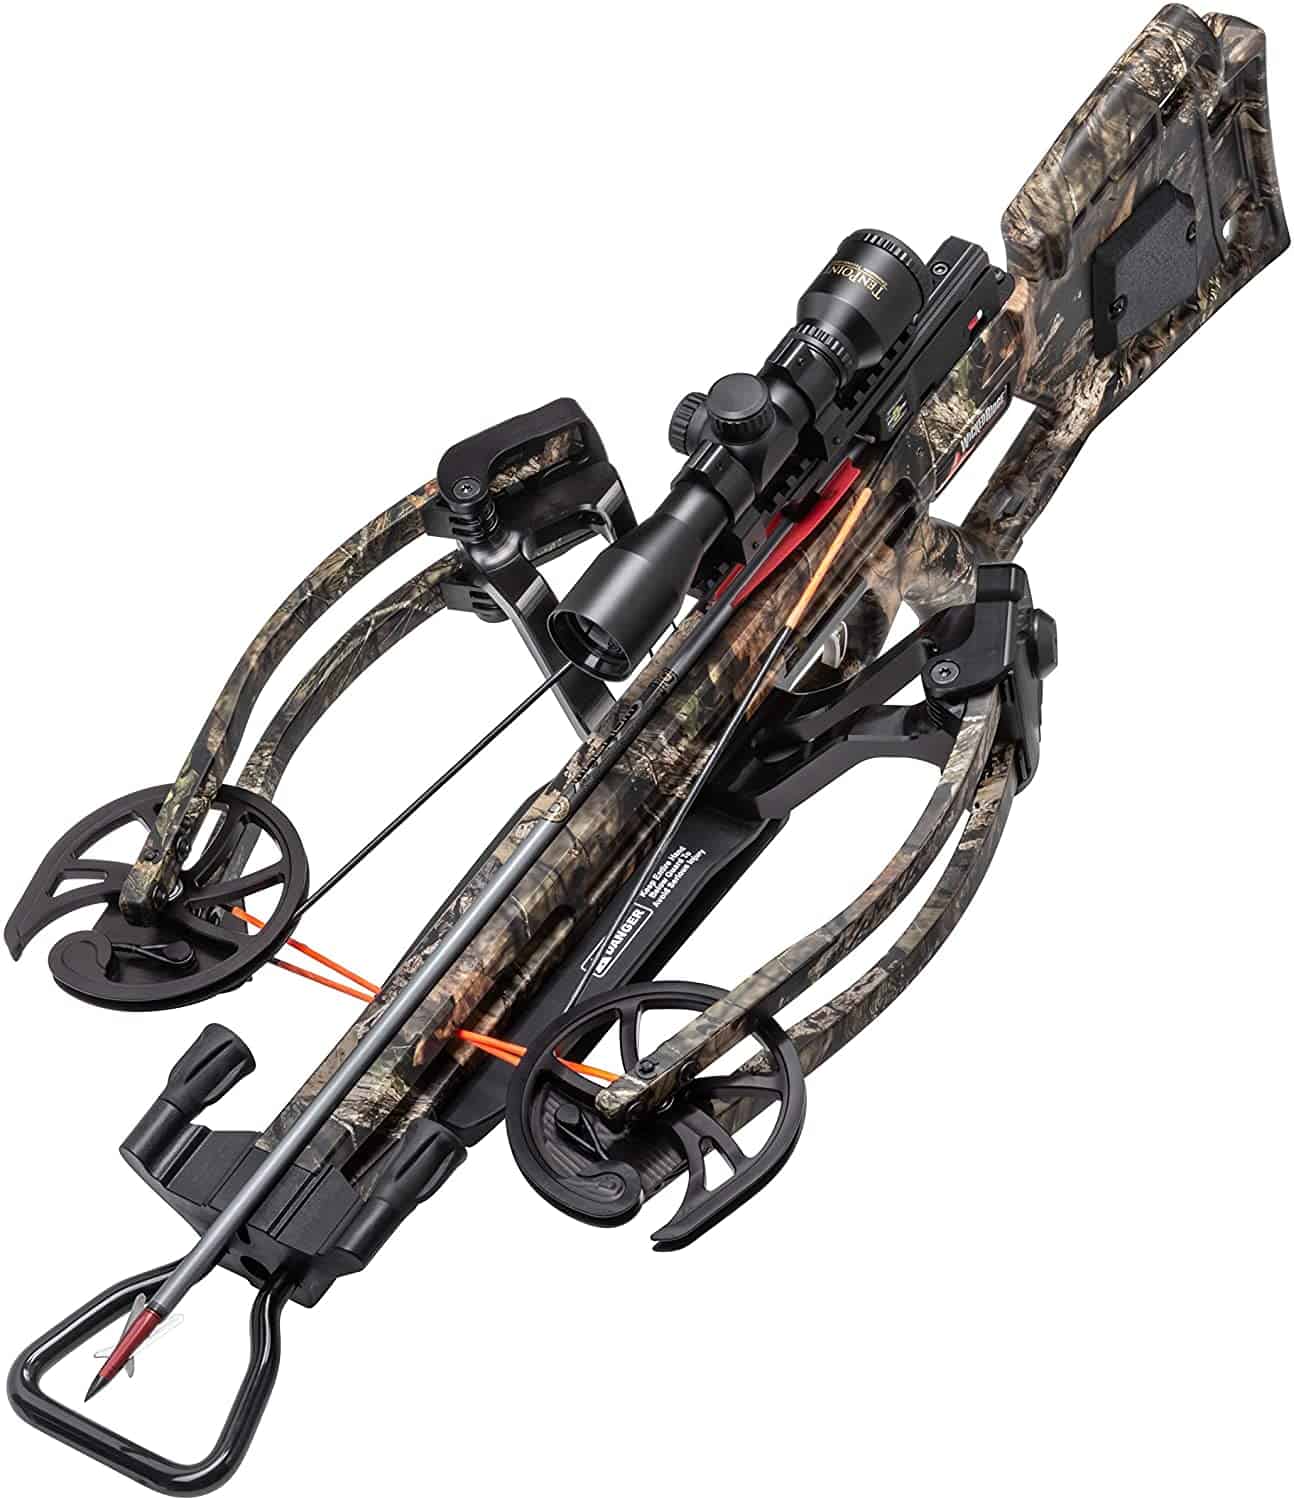 Wicked Ridge Crossbow Review: Ultimate Buyer's Guide in 2021 - BowScanner